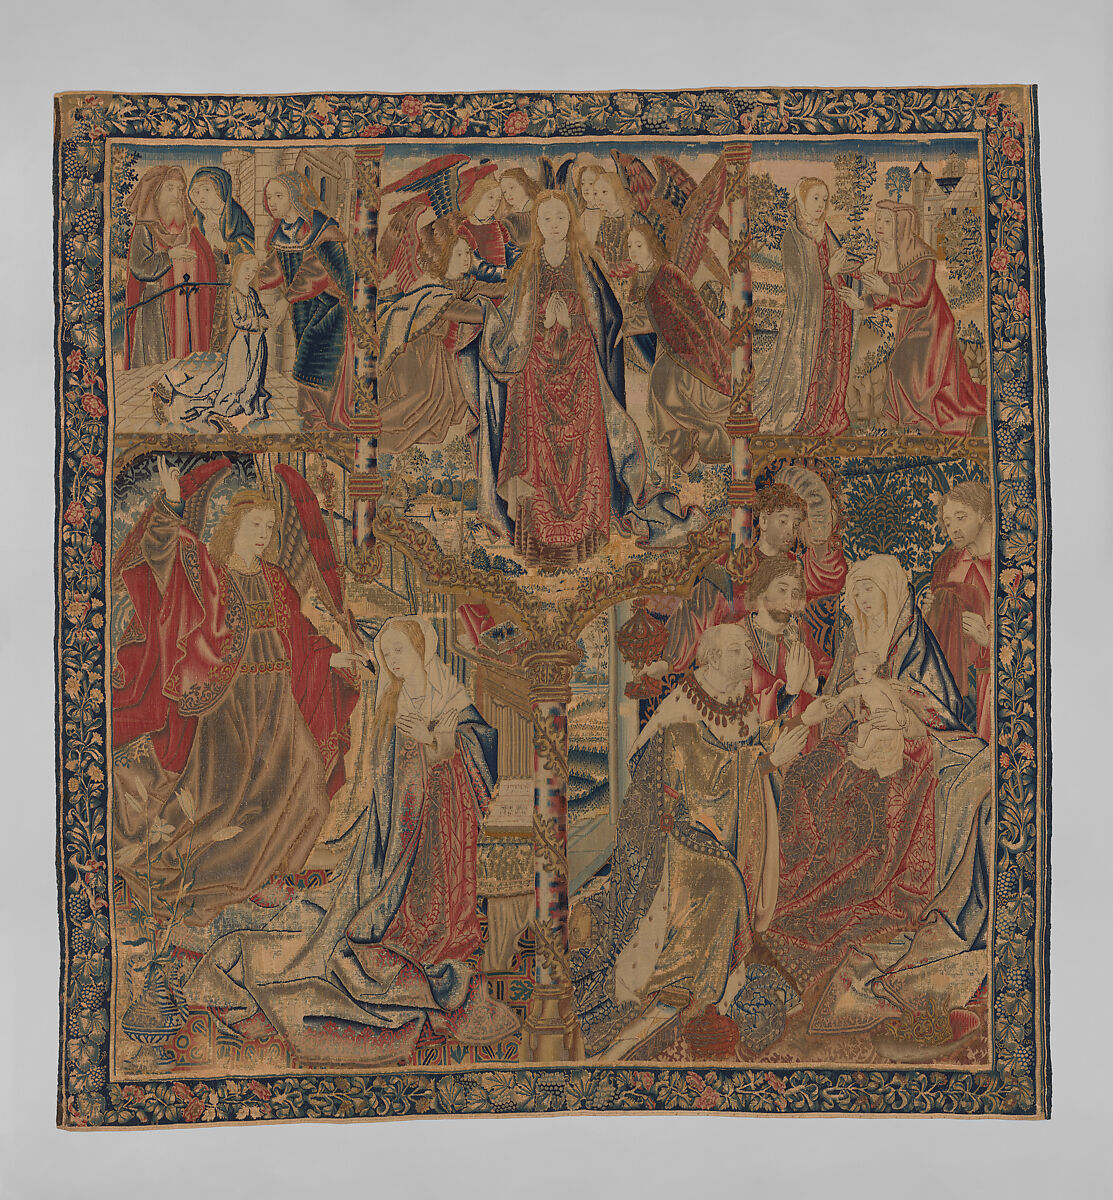 Scenes from the Life of the Virgin, Wool warp, wool, silk, and metallic wefts, South Netherlandish 